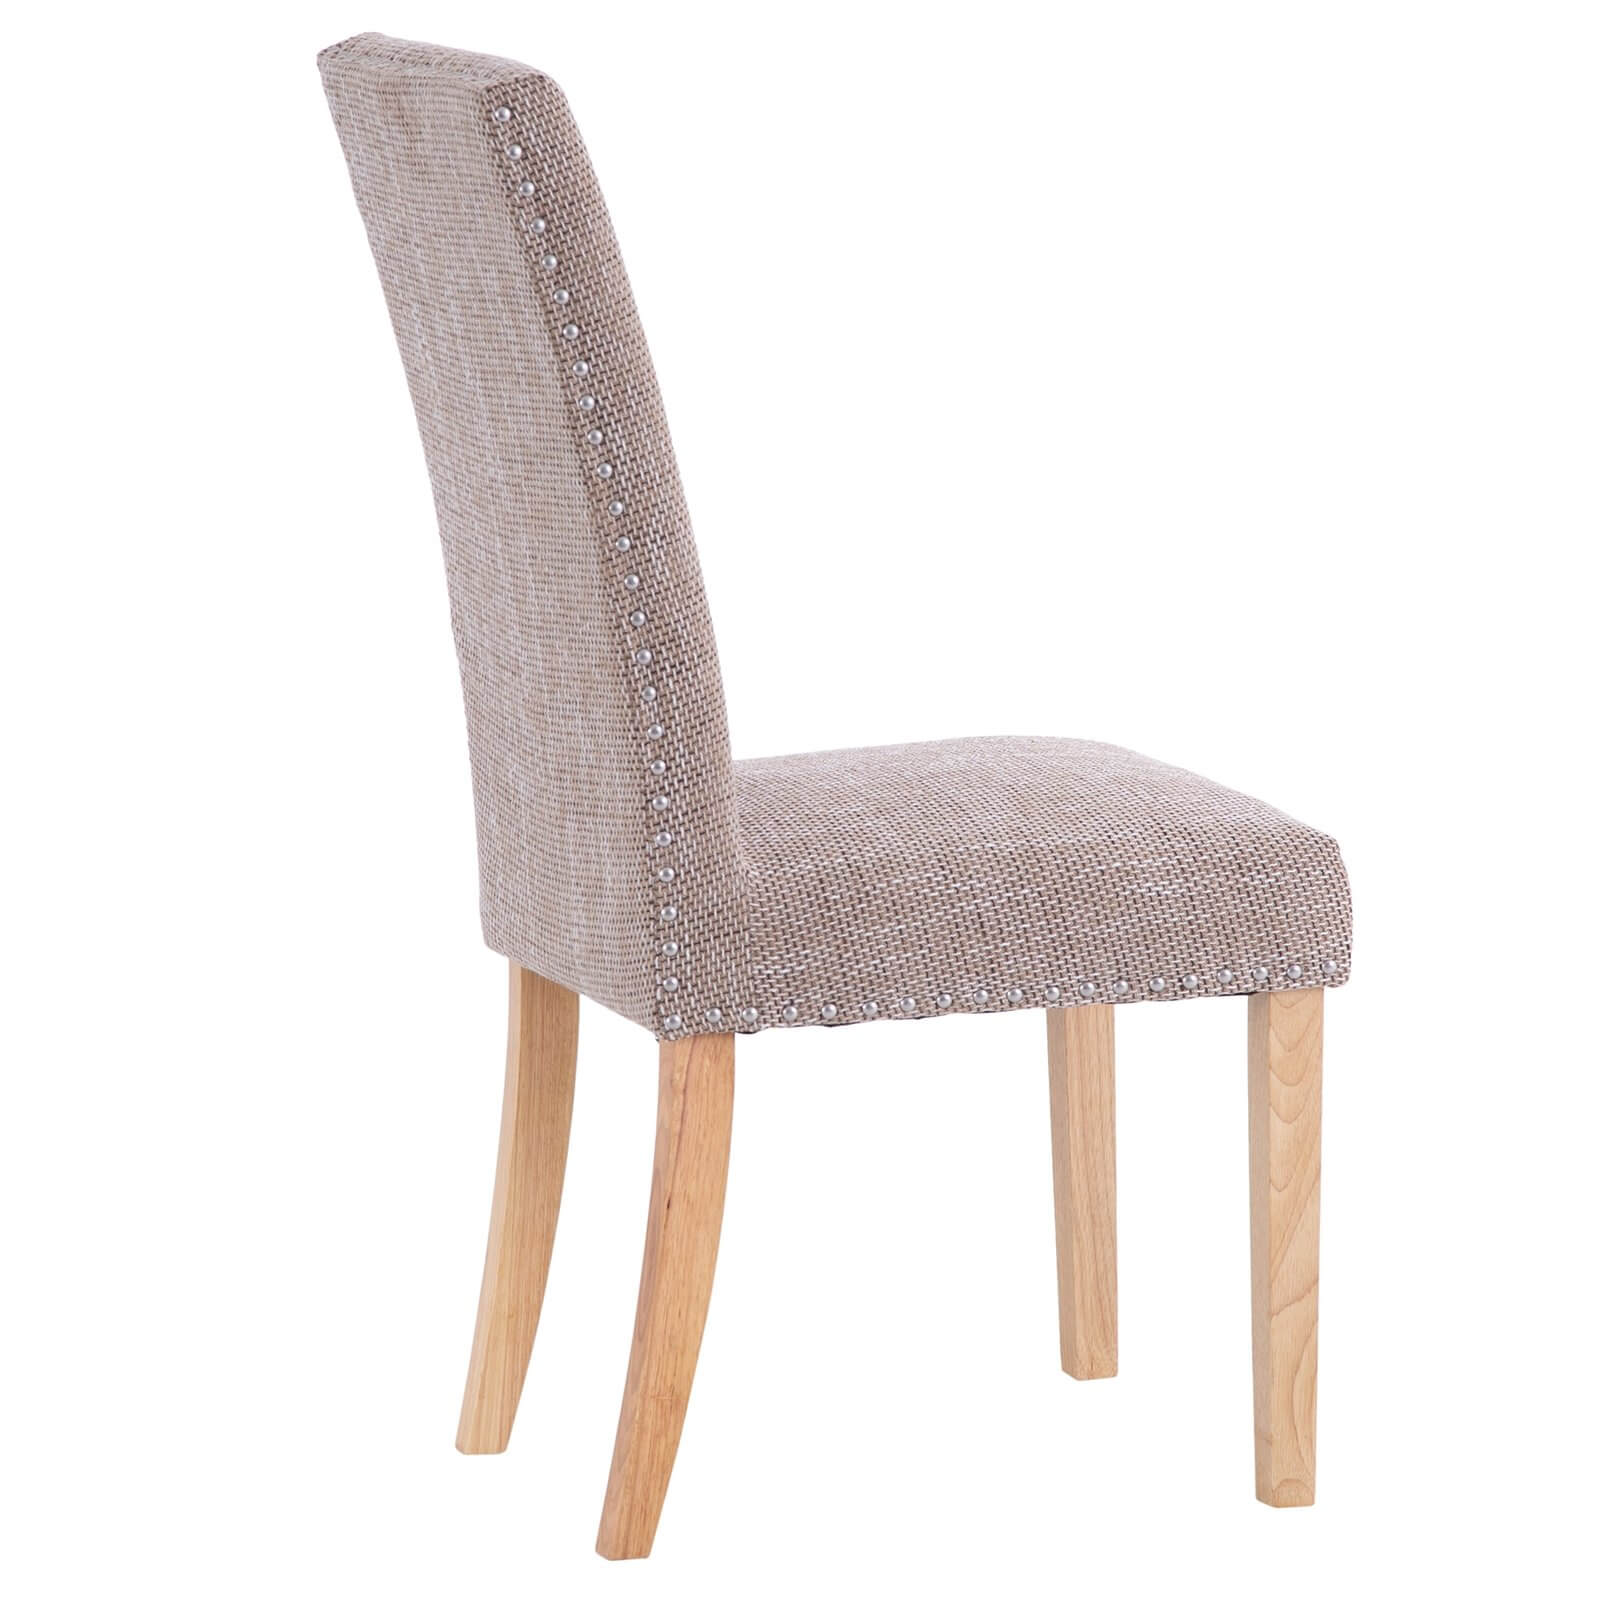 Studded Tweed Dining Chair - Set of 2